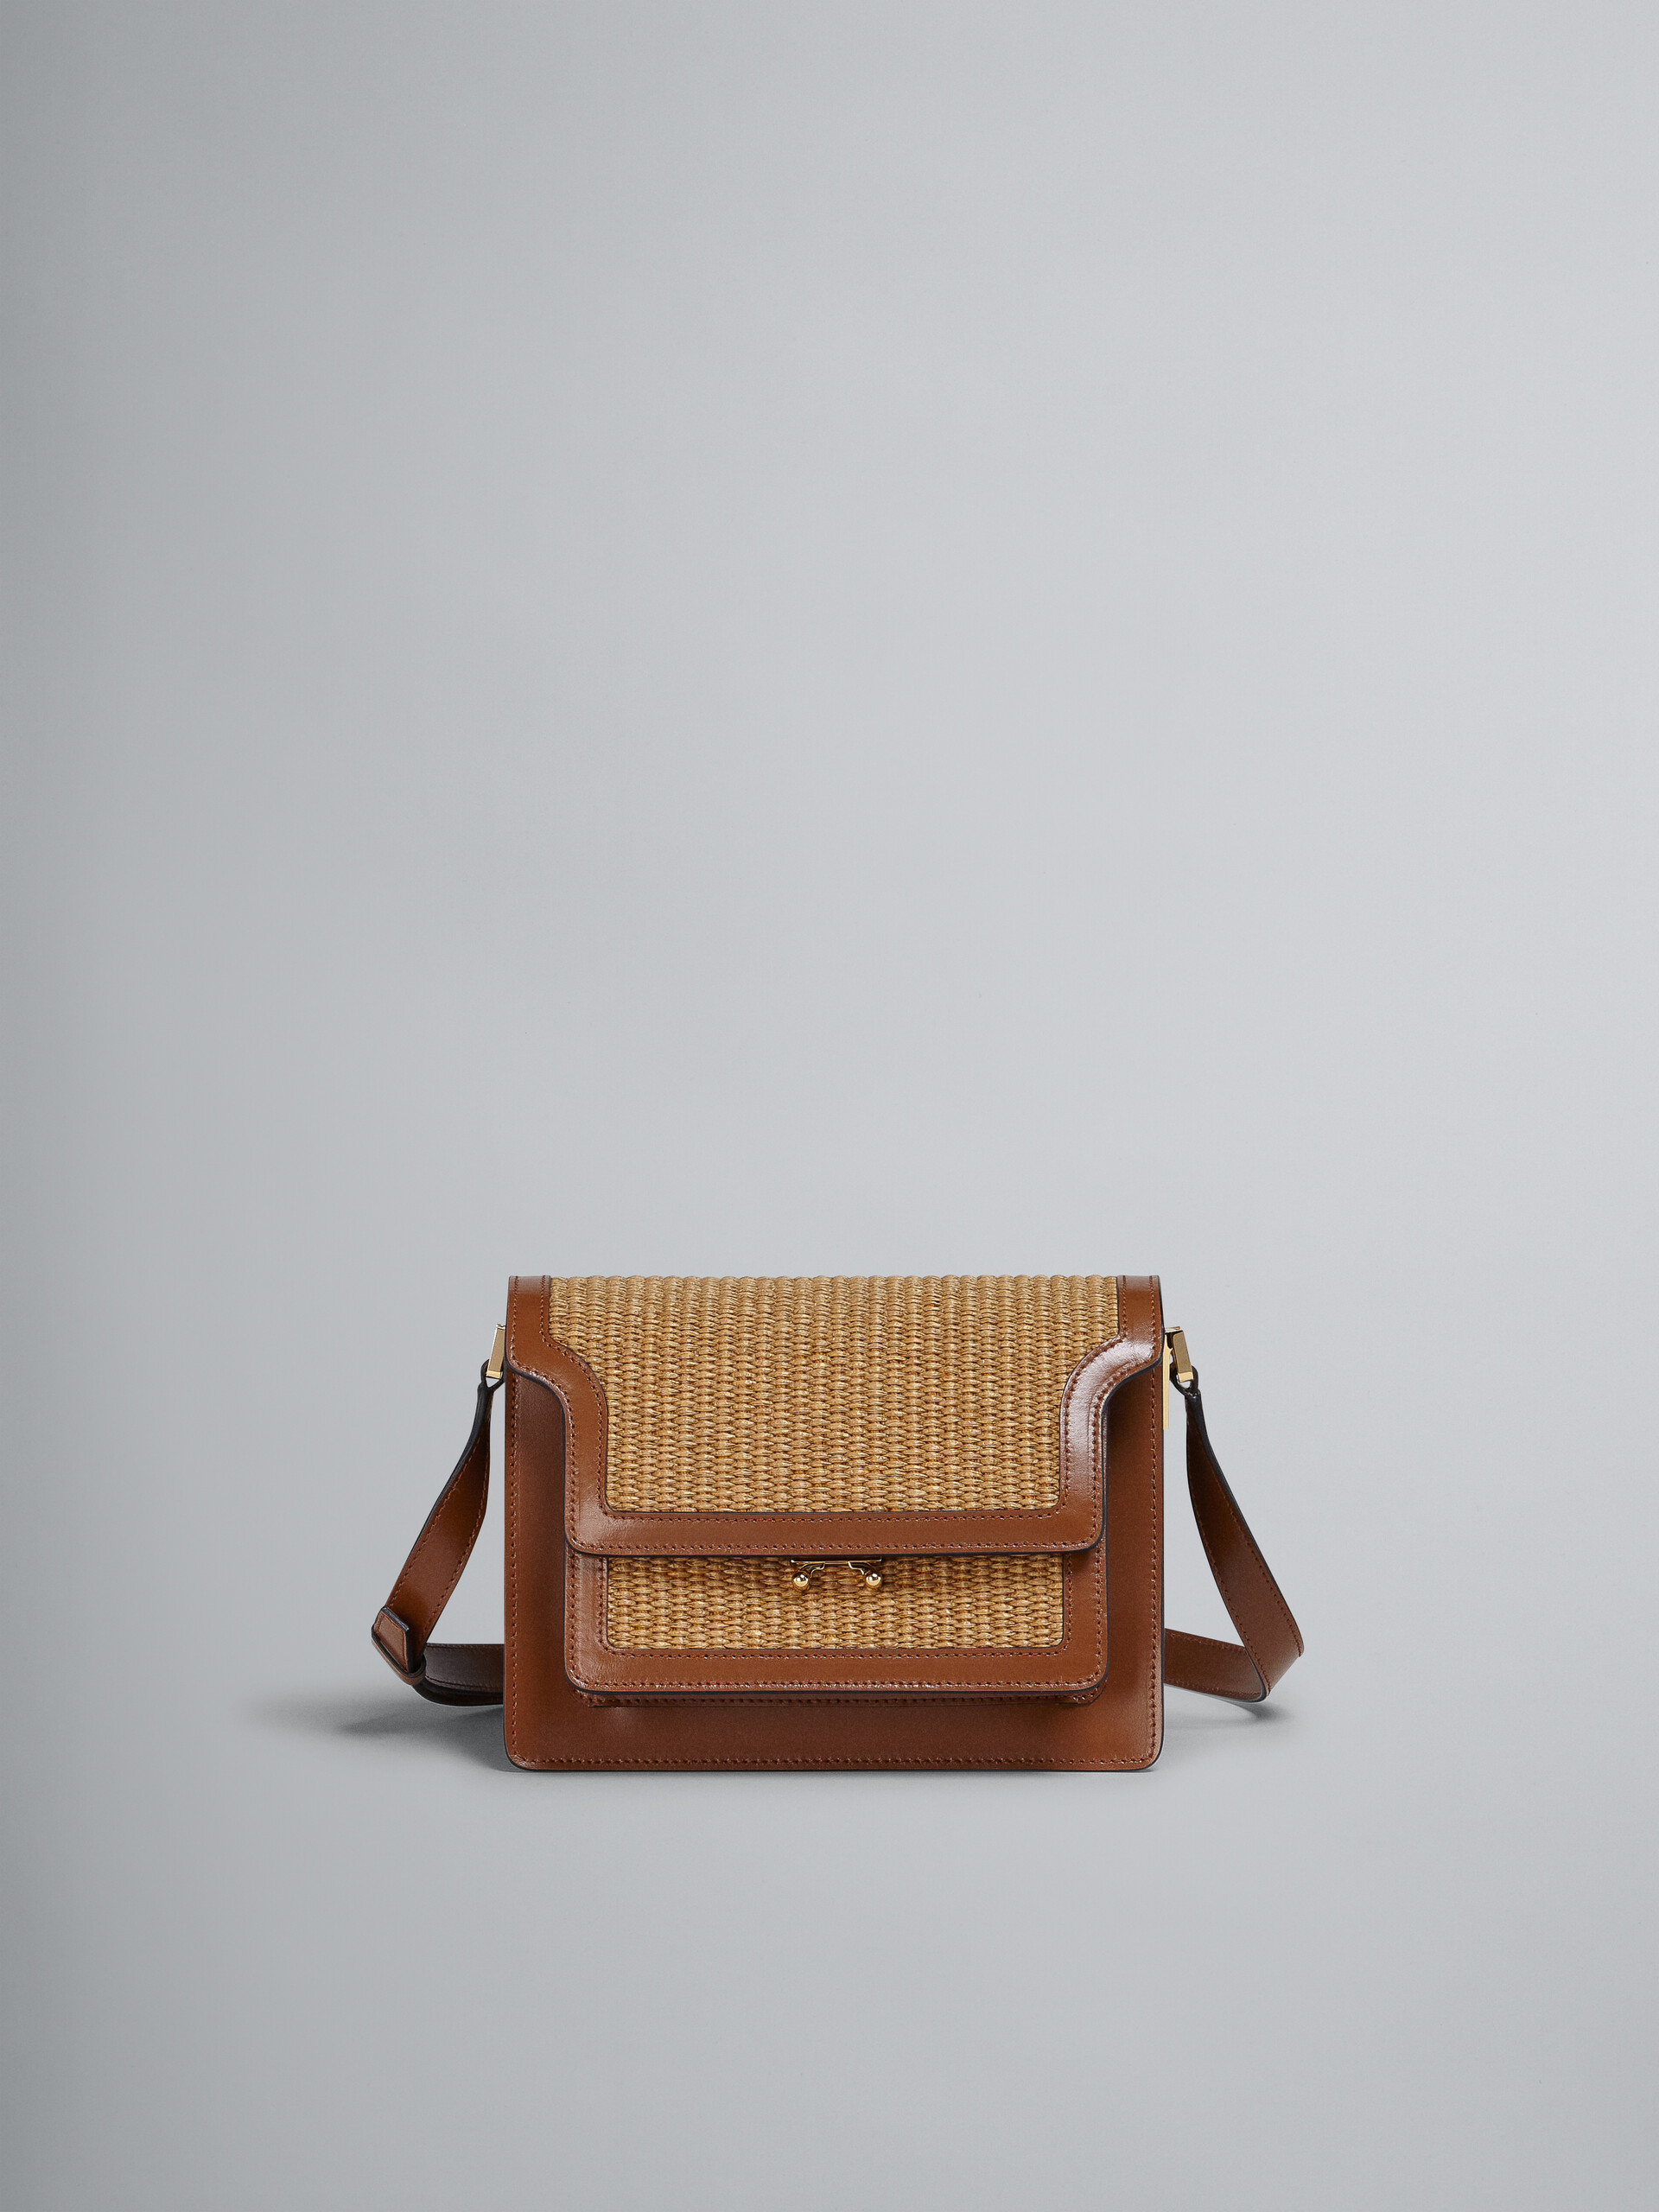 TRUNK SOFT medium bag in brown leather and raffia - Shoulder Bags - Image 1